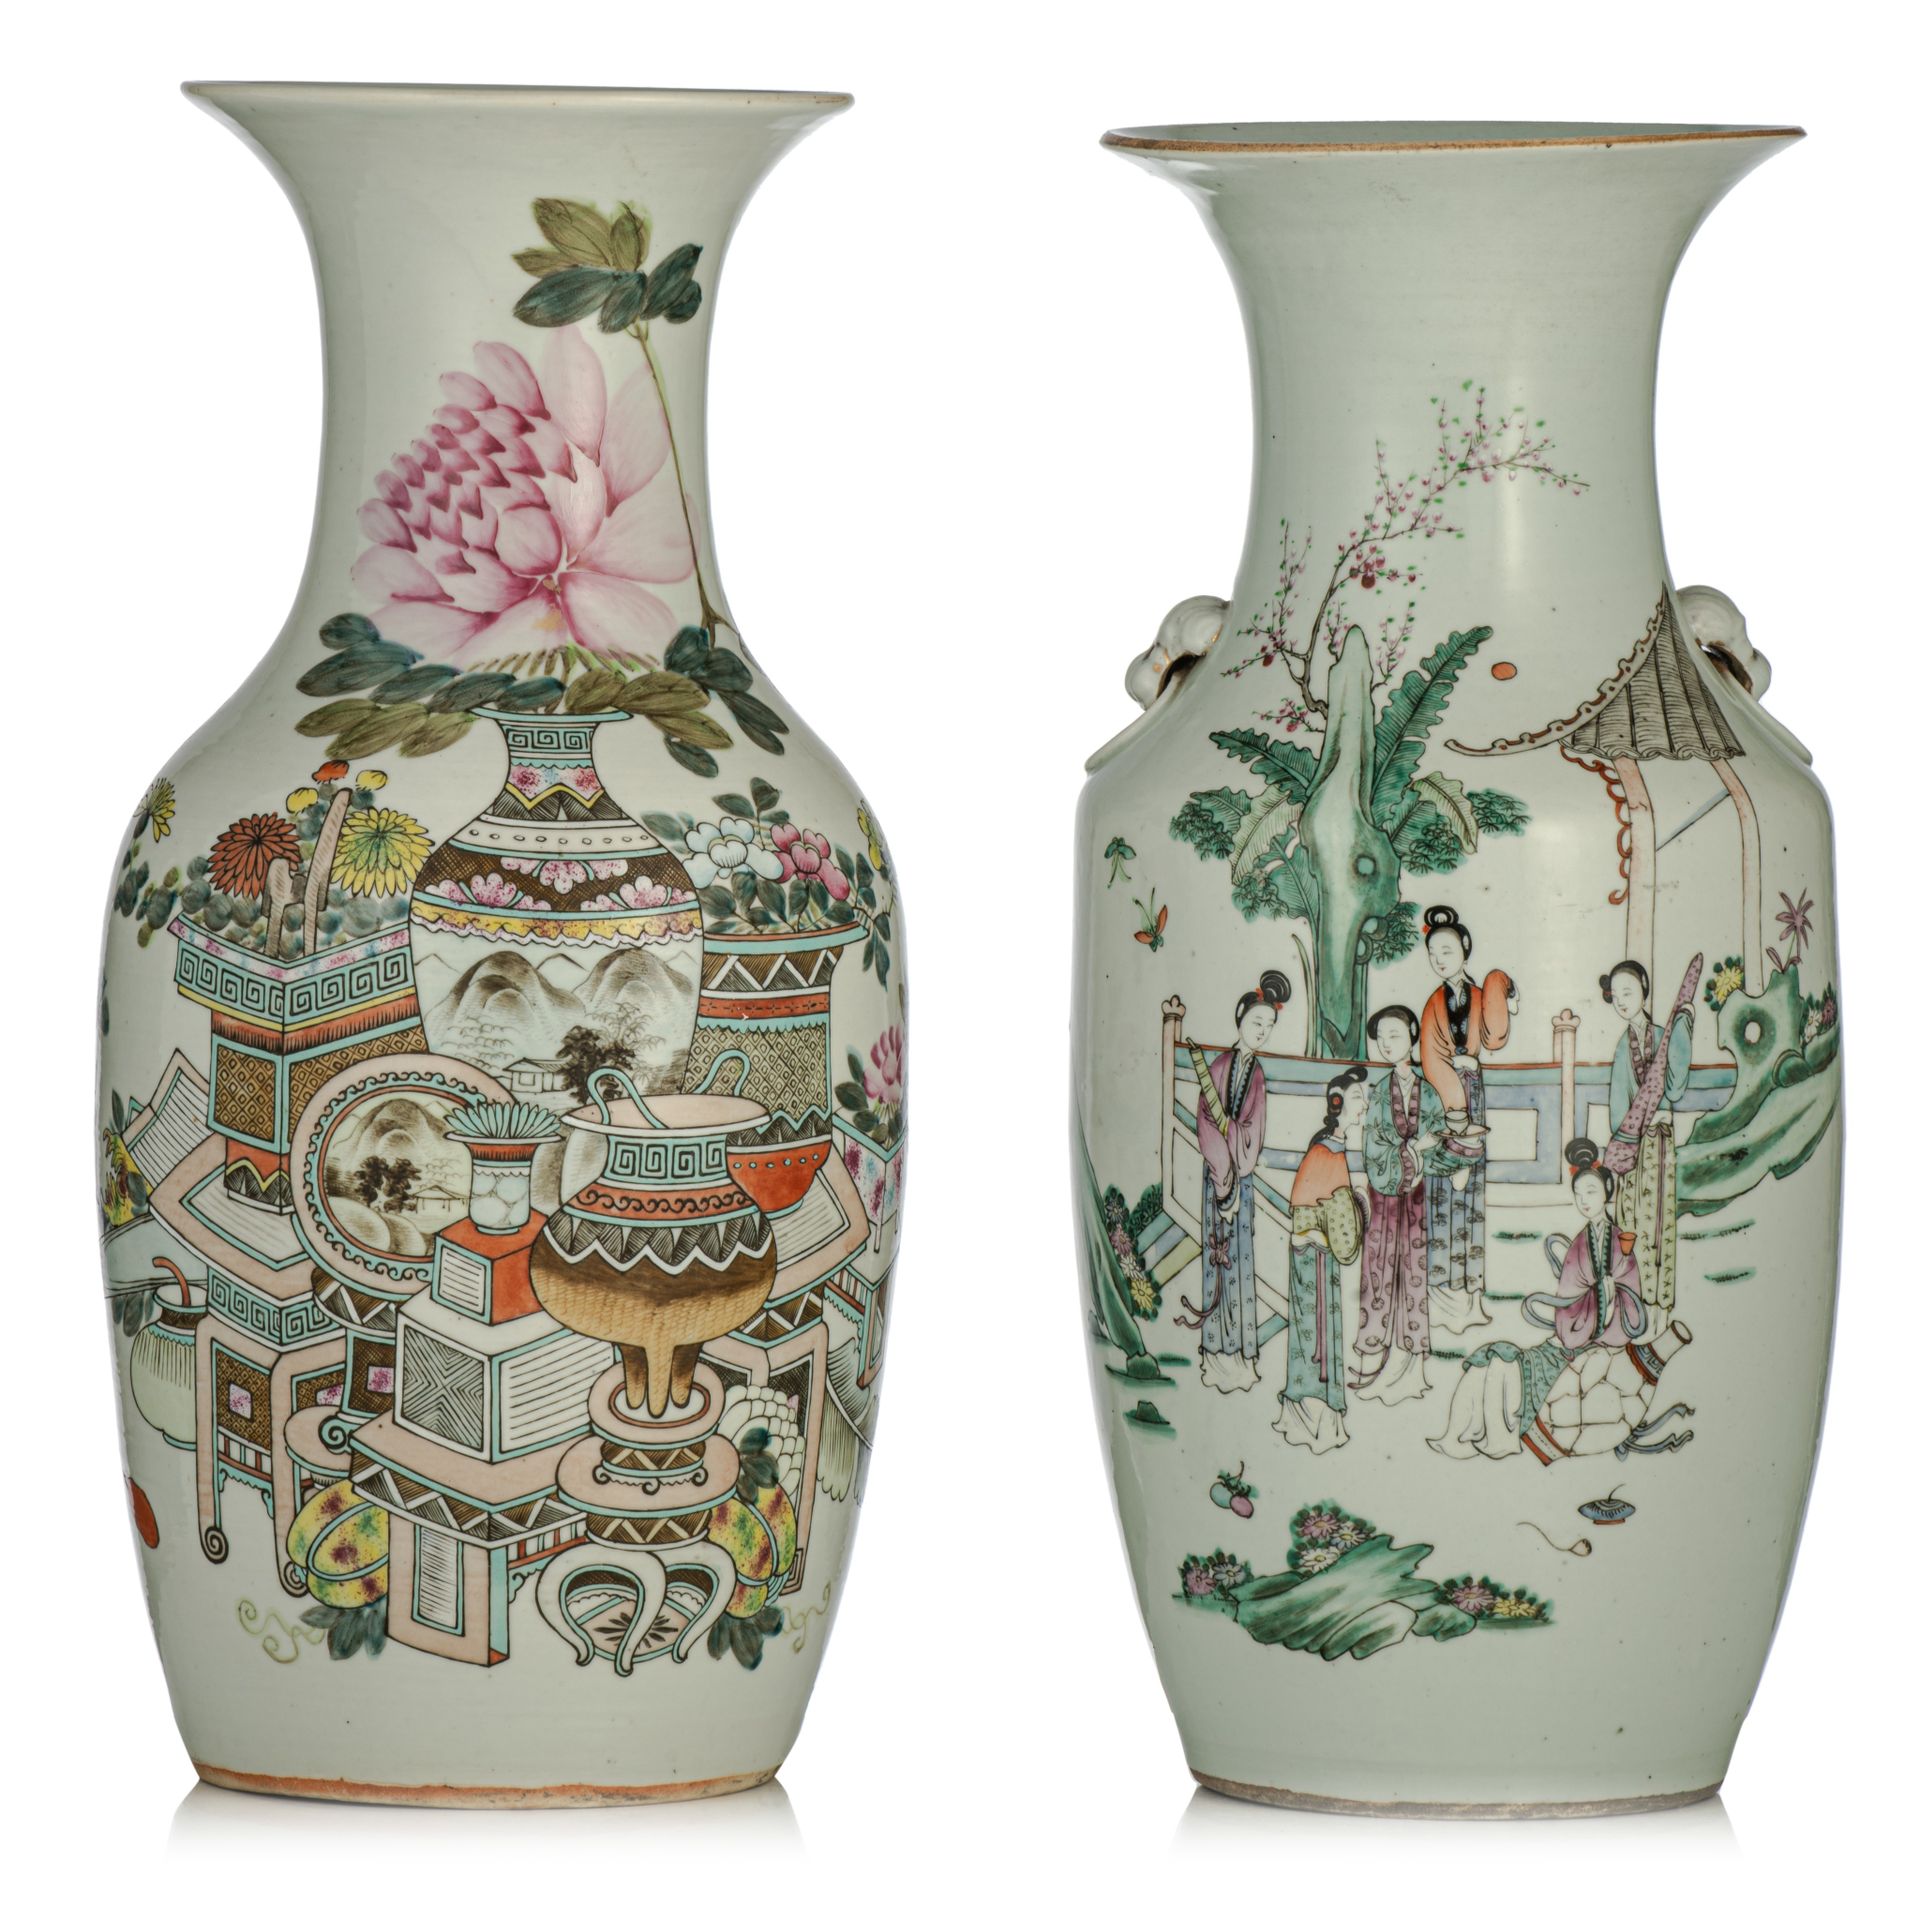 A Chinese Qianjiangcai vase and a famille rose vase, both with a signed text, Re&hellip;